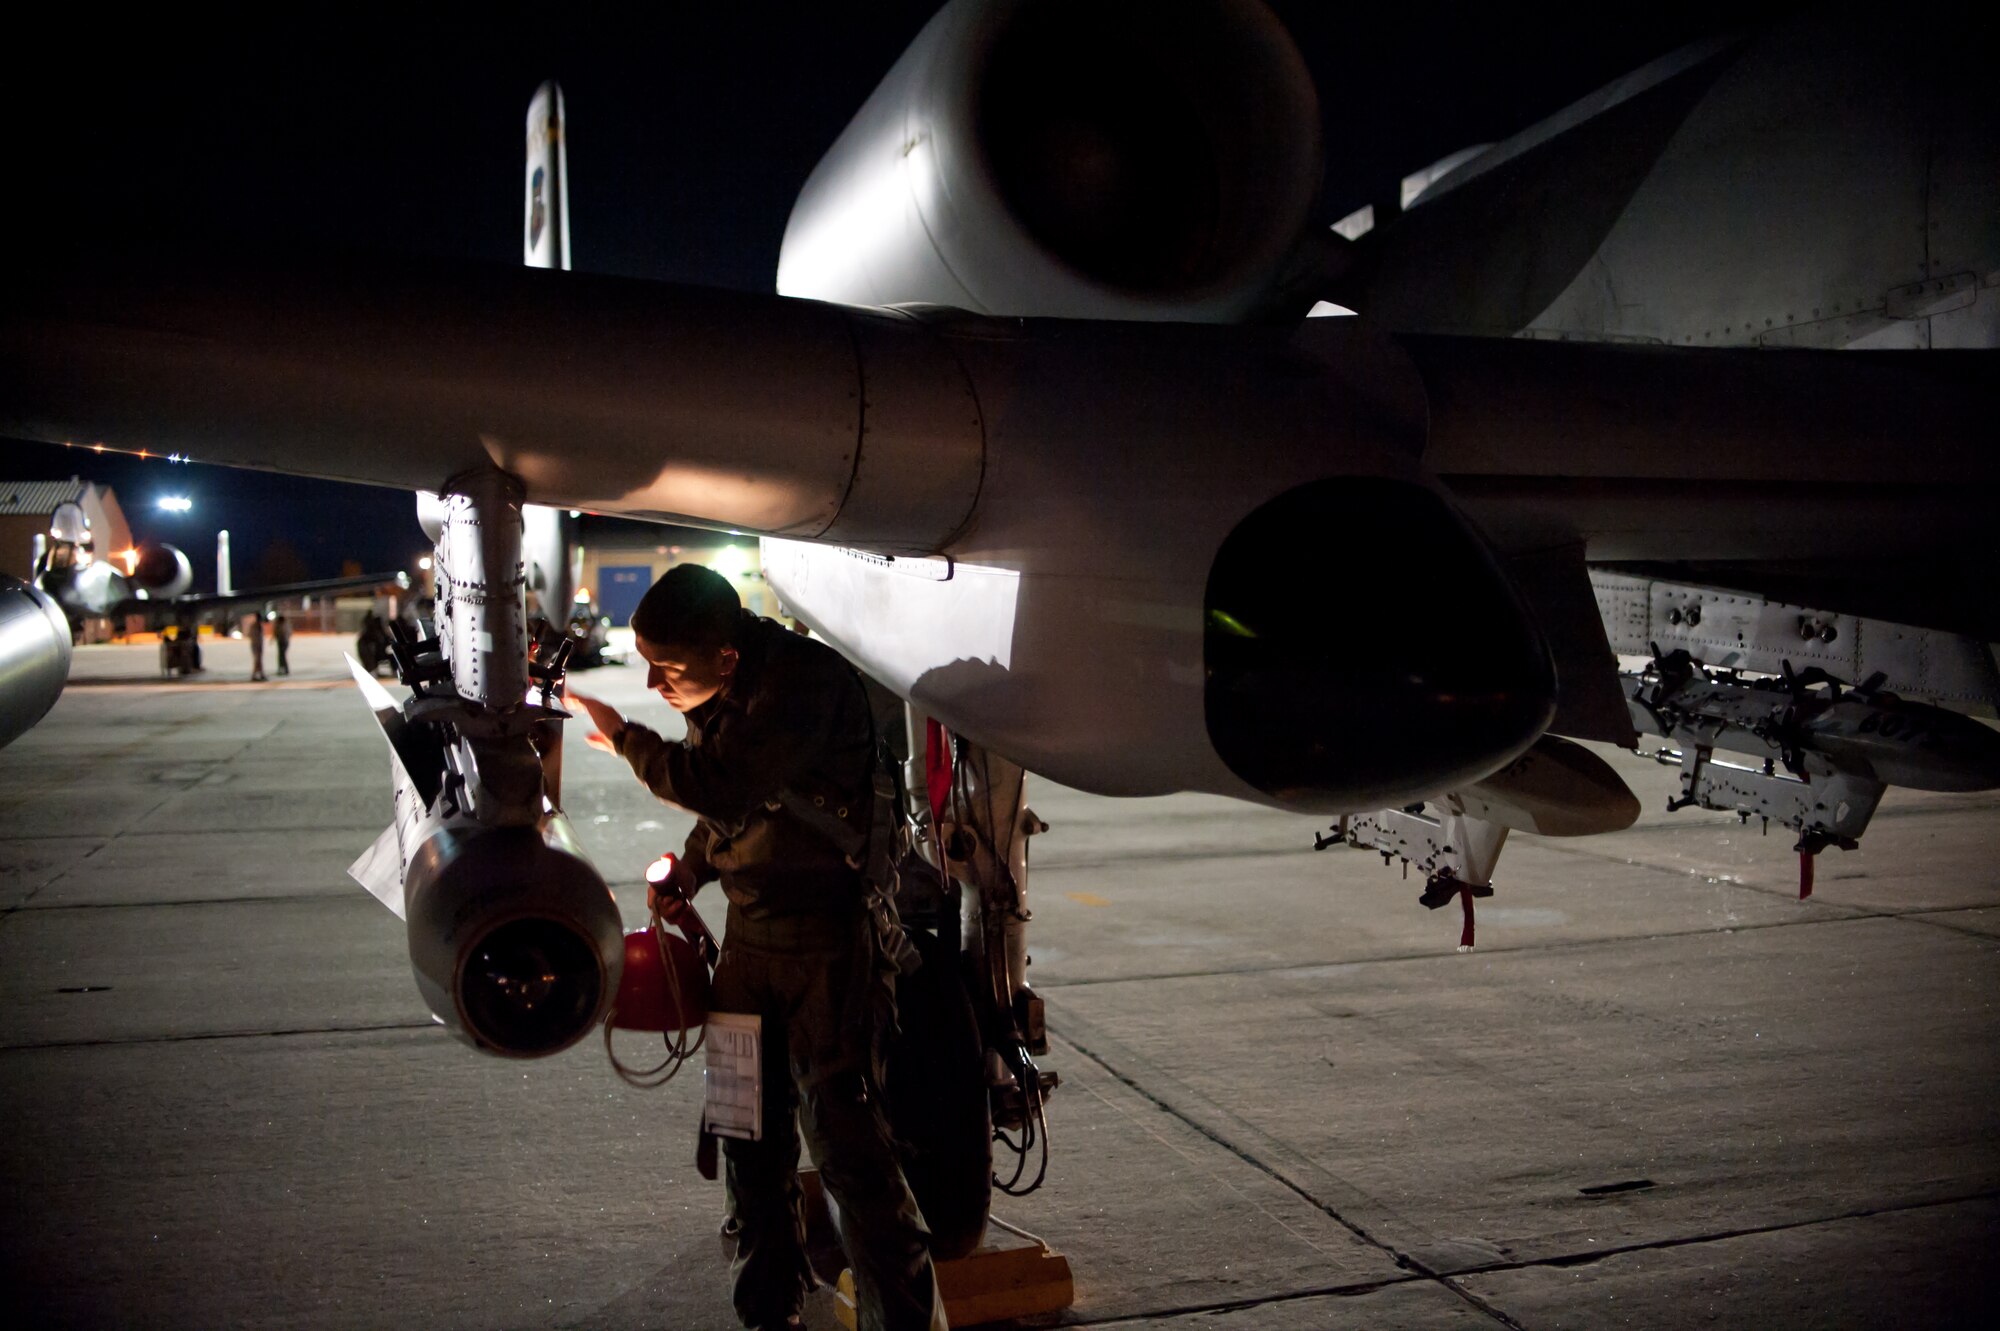 Instructors from the 66th Weapons Squadron (WS), along with students enrolled in the United States Air Force Weapons School, and pilots with the 190th Fighter Squadron (FS) prepare to take off on a night mission in their A-10 Thunderbolt IIs from Gowen Field, Boise, Idaho on November 10. The 66th WS, stationed at Nellis Air Force Base, Nevada, is conducting USAF Weapons School training from Gowen Field, in conjunction with A-10s from the 190th FS, and other agencies and units, providing realistic training opportunities in nearby ranges.  (U.S. Air Force by Staff Sgt. Robert Barney)